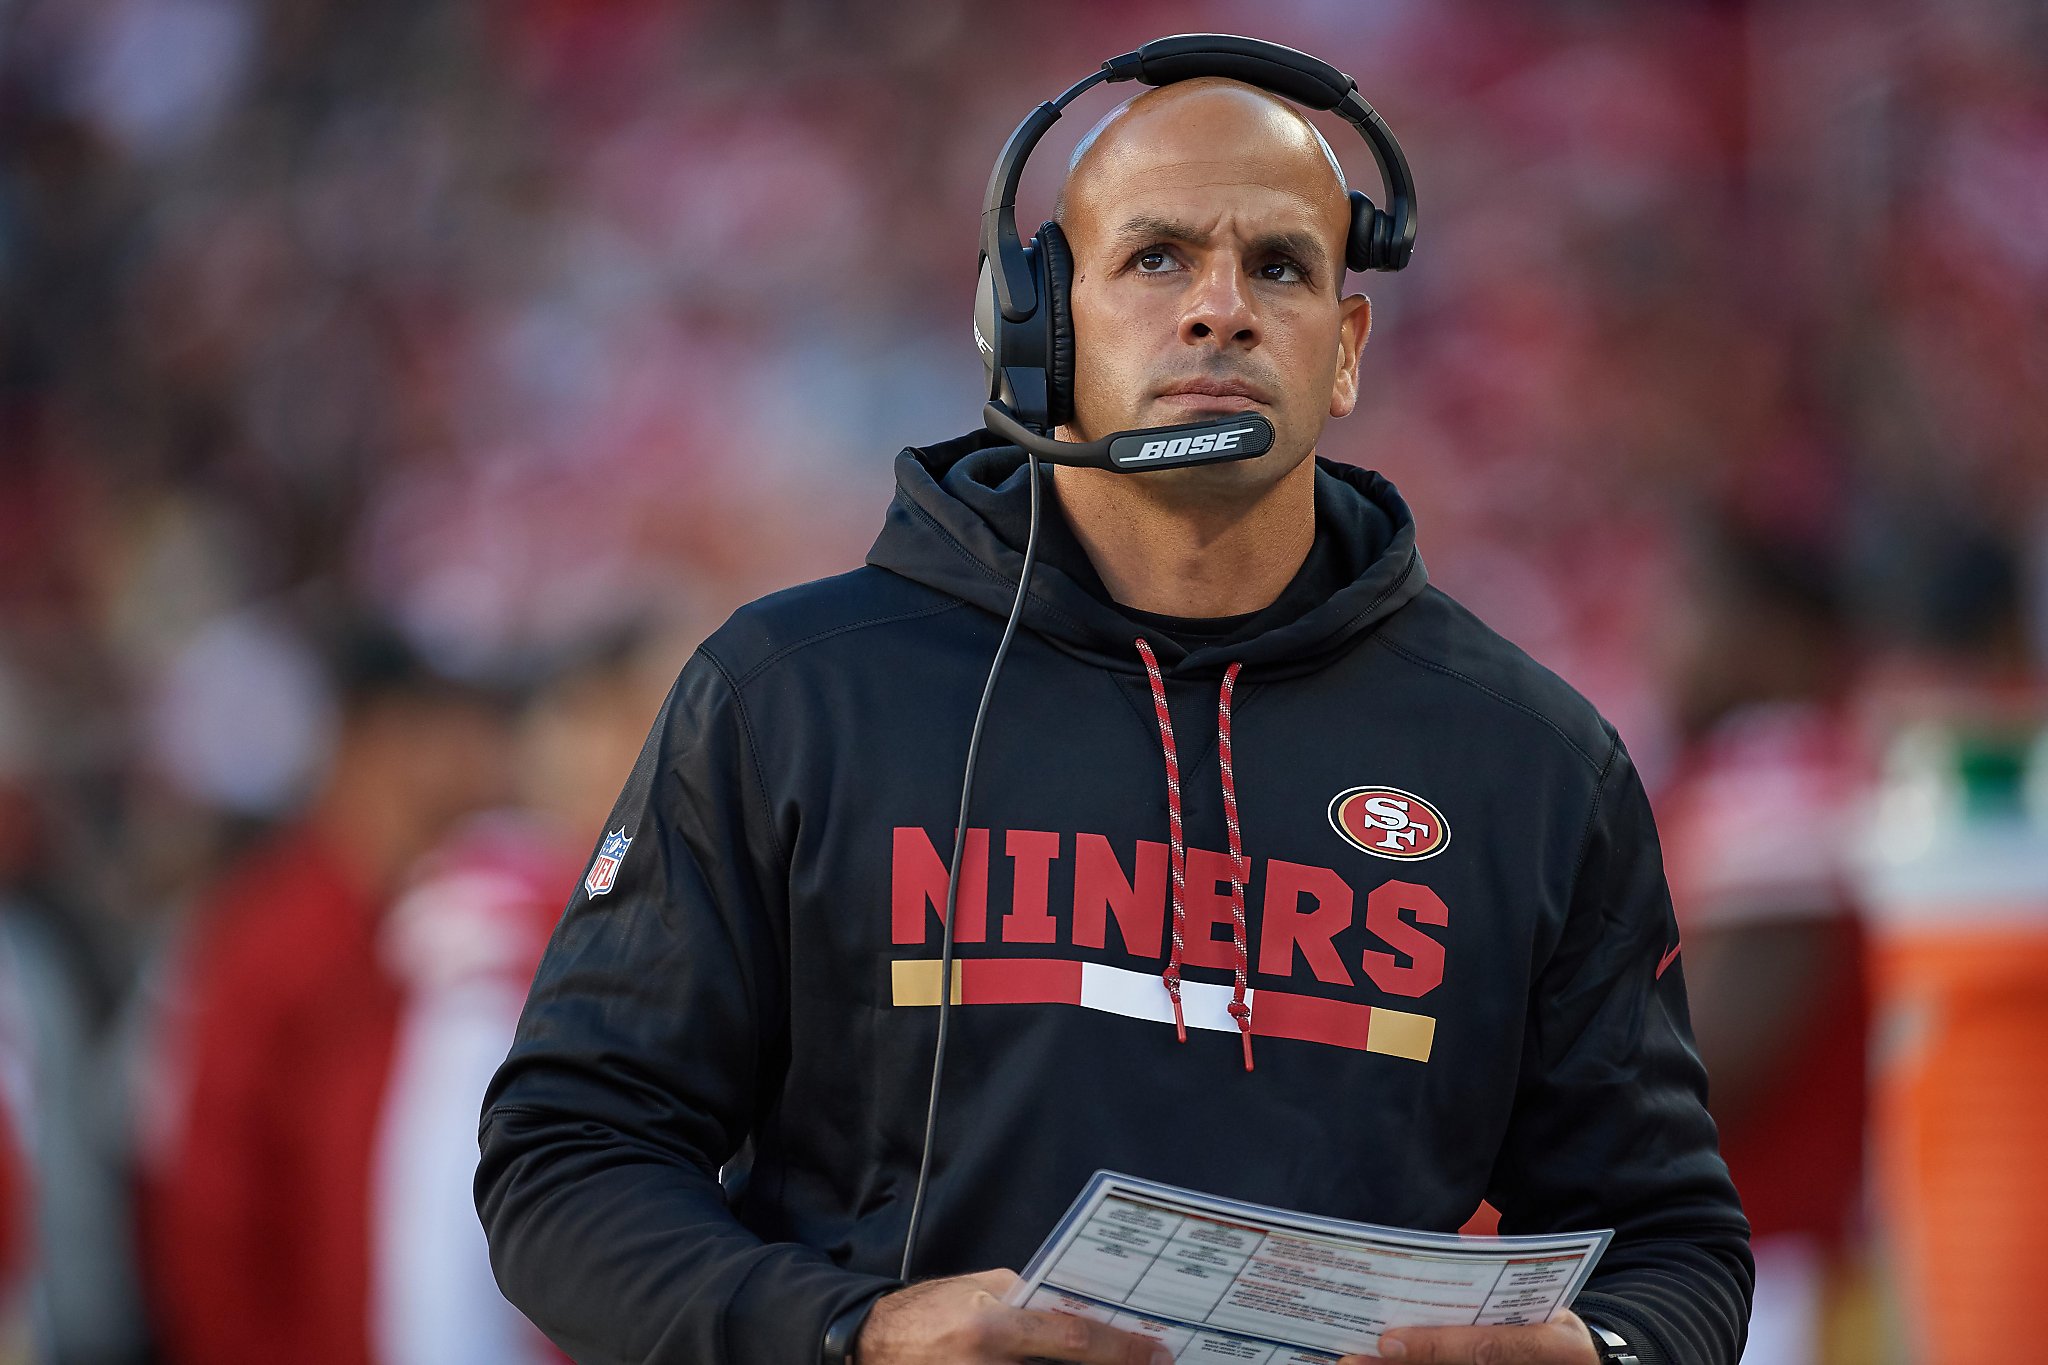 Niners defensive coordinator quotes 'Step Brothers' to explain  49ers-Seahawks matchup